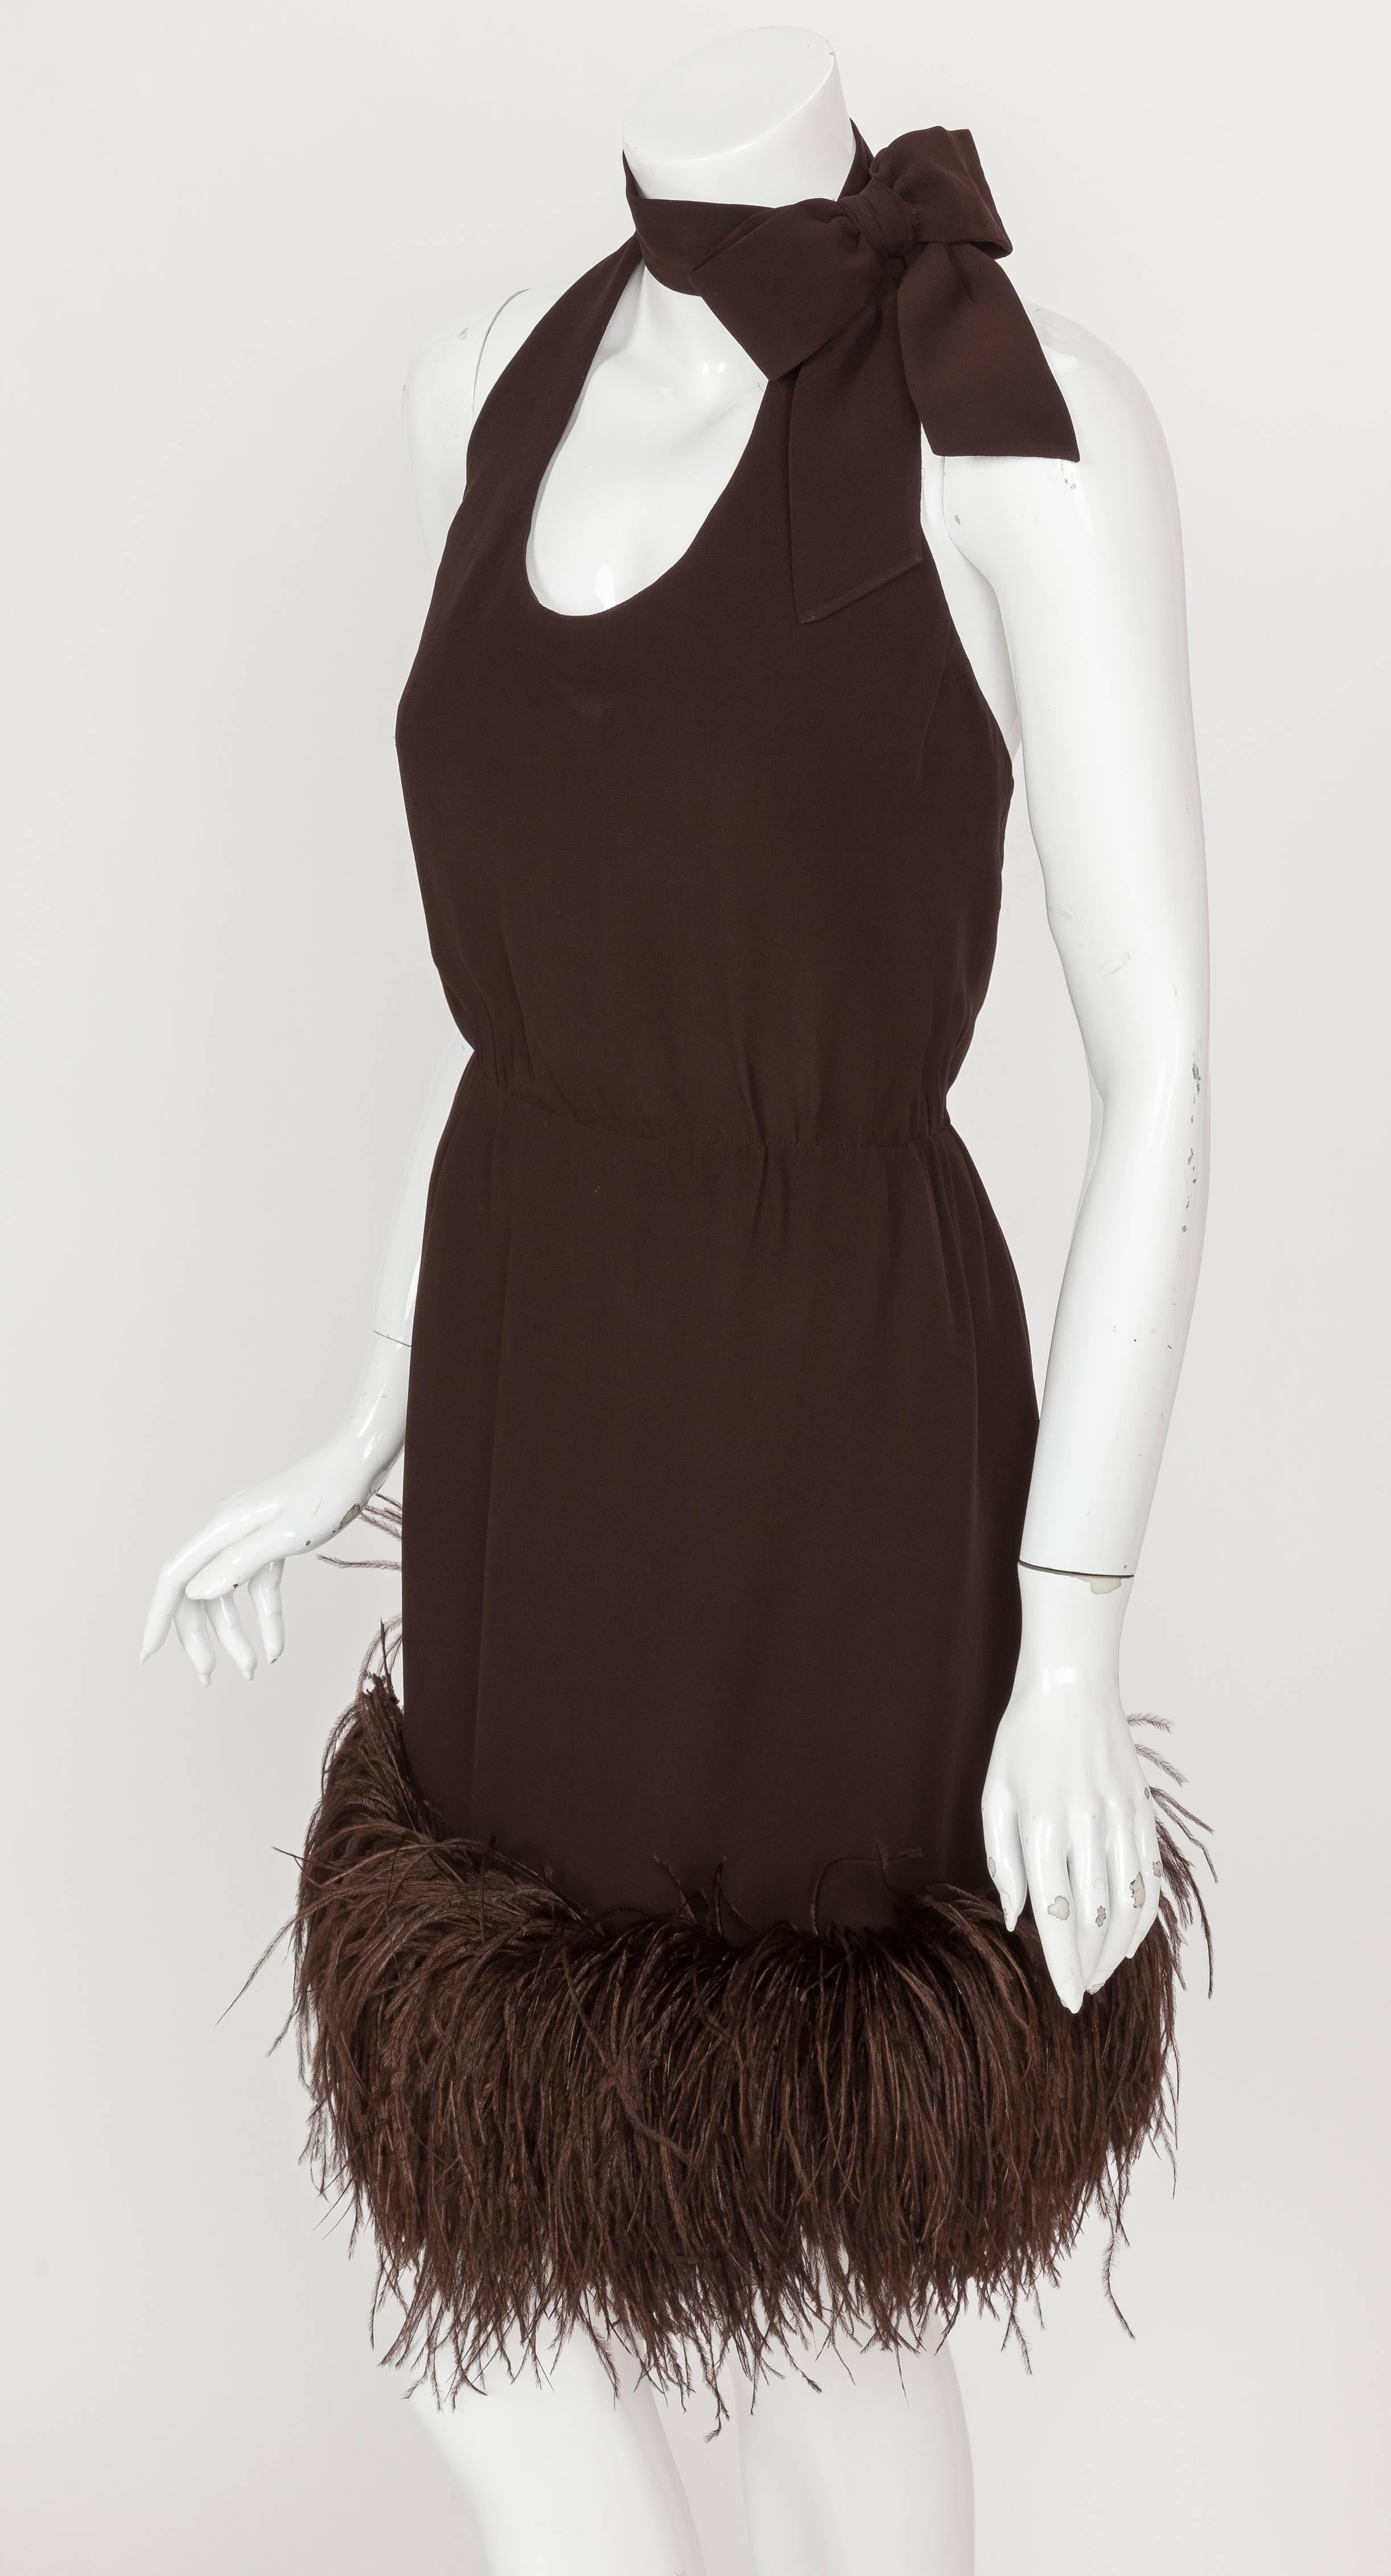 A mid-1960s Pierre Cardin haute couture brown chiffon halter dress with neck bow and Ostrich feather trim. Constructed from chocolate brown bias-cut silk chiffon, the cocktail dress features a wrap-around bow at the neck, an open back and Ostrich